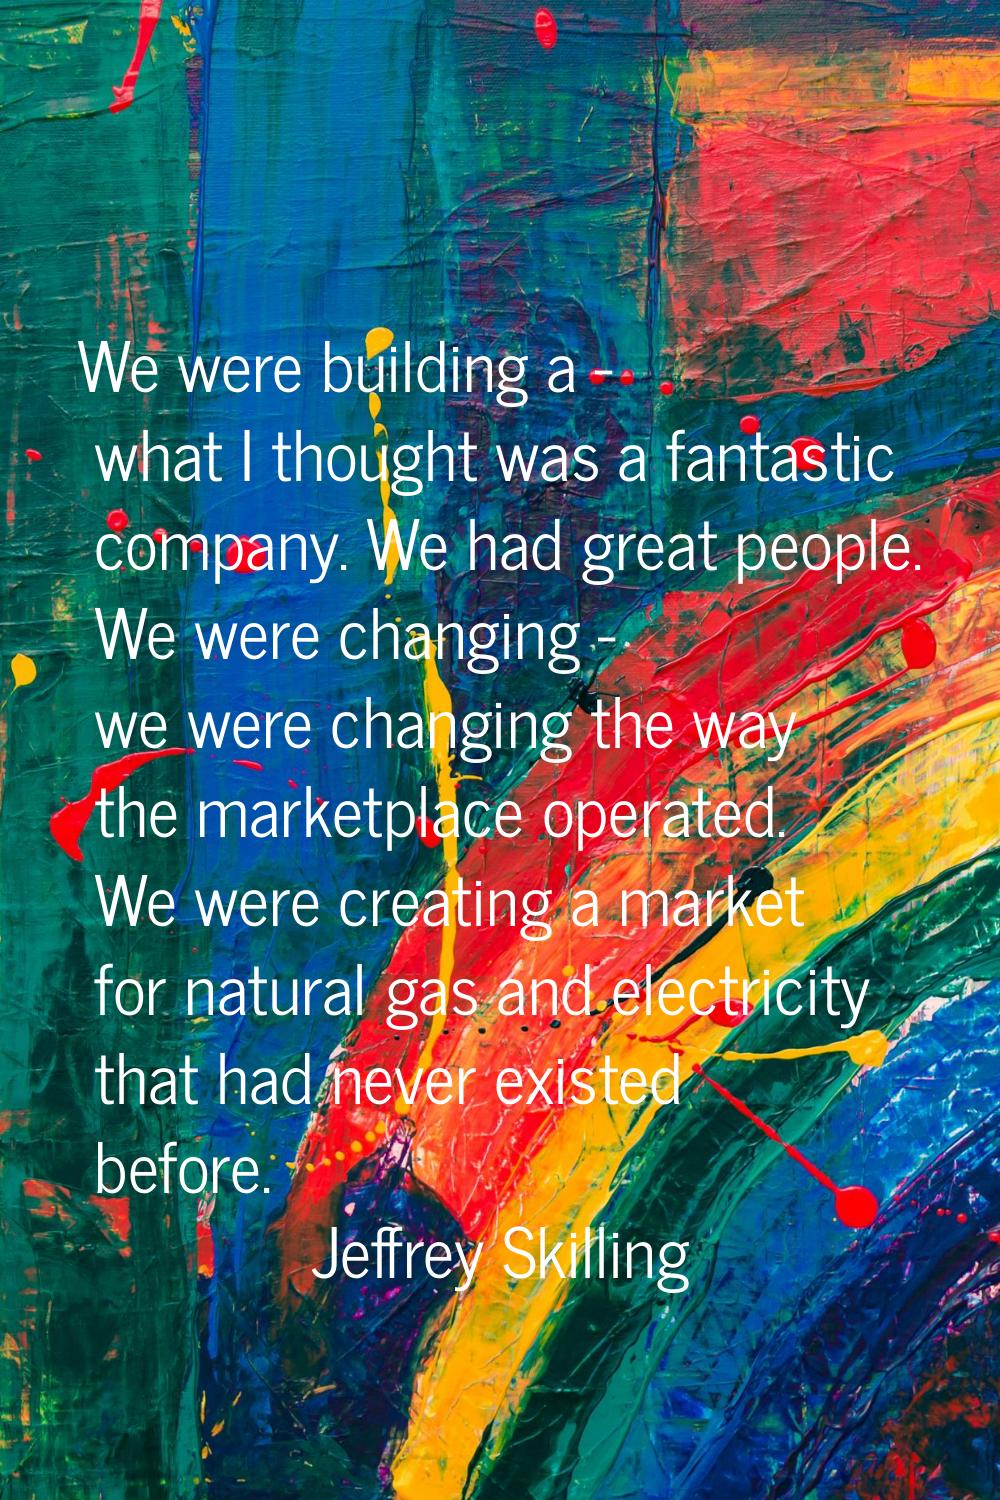 We were building a - what I thought was a fantastic company. We had great people. We were changing 